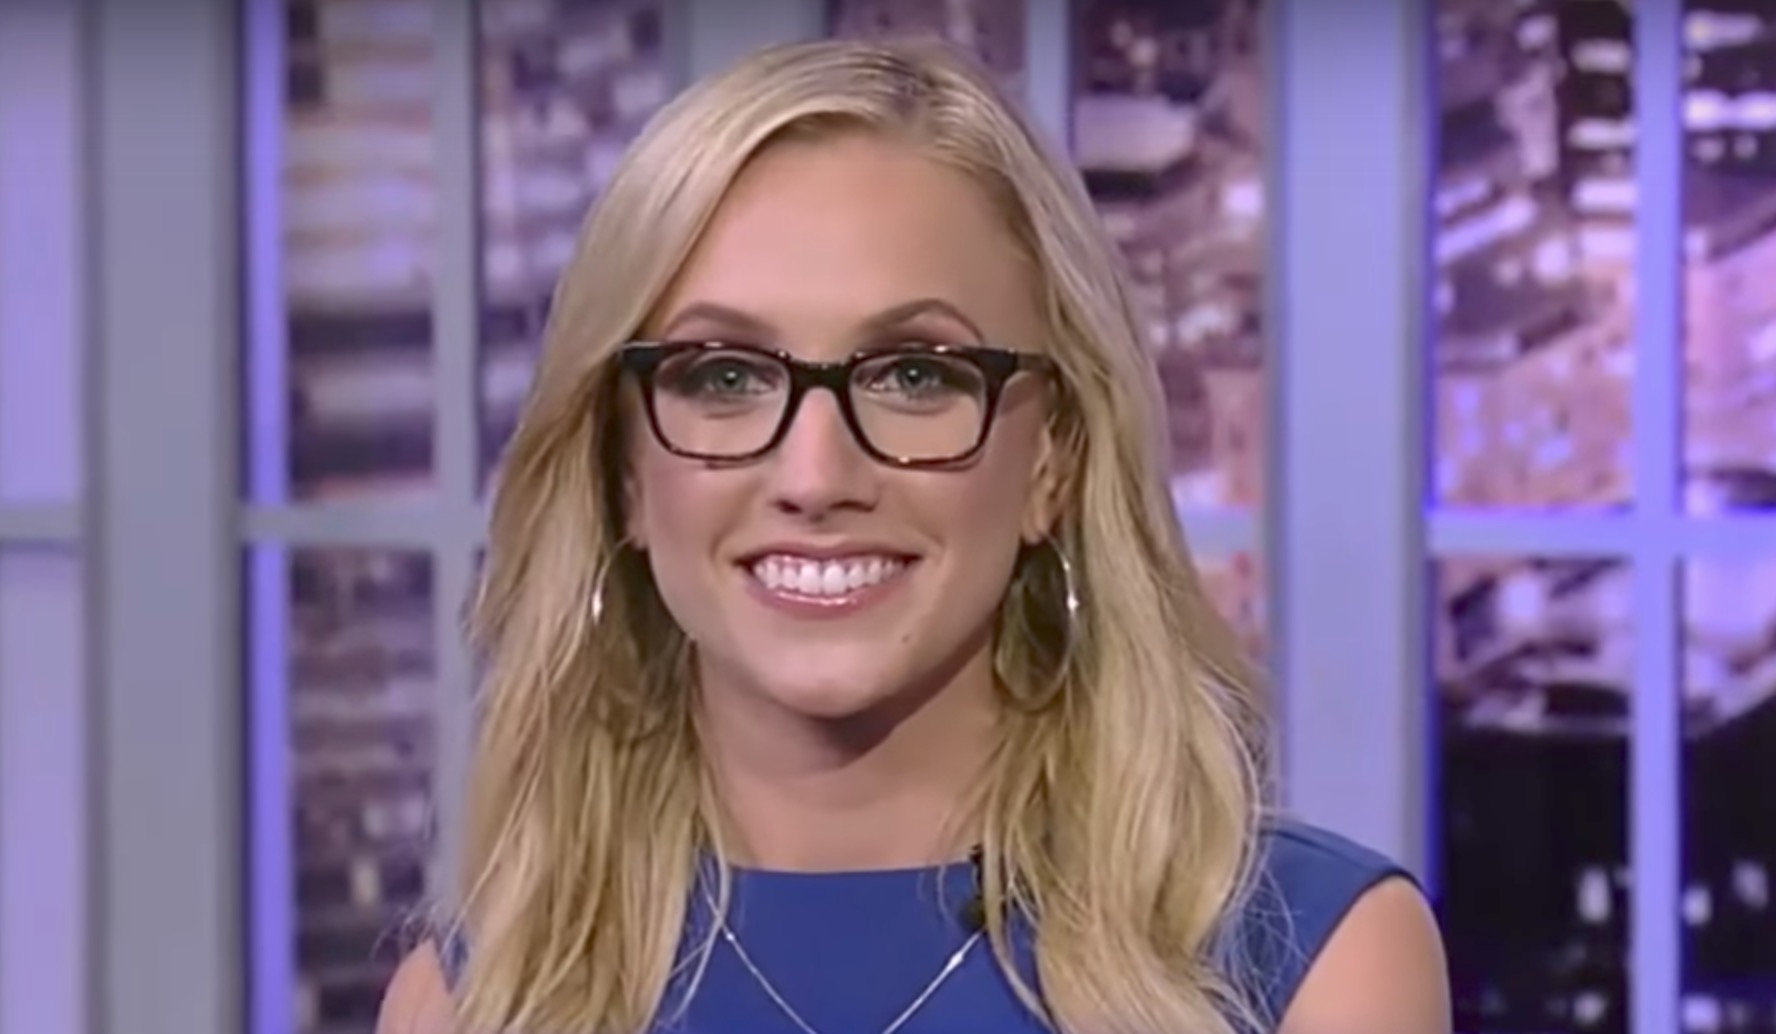 Kat Timpf wearing a blue gown with an eye glass having a huge smile on her face